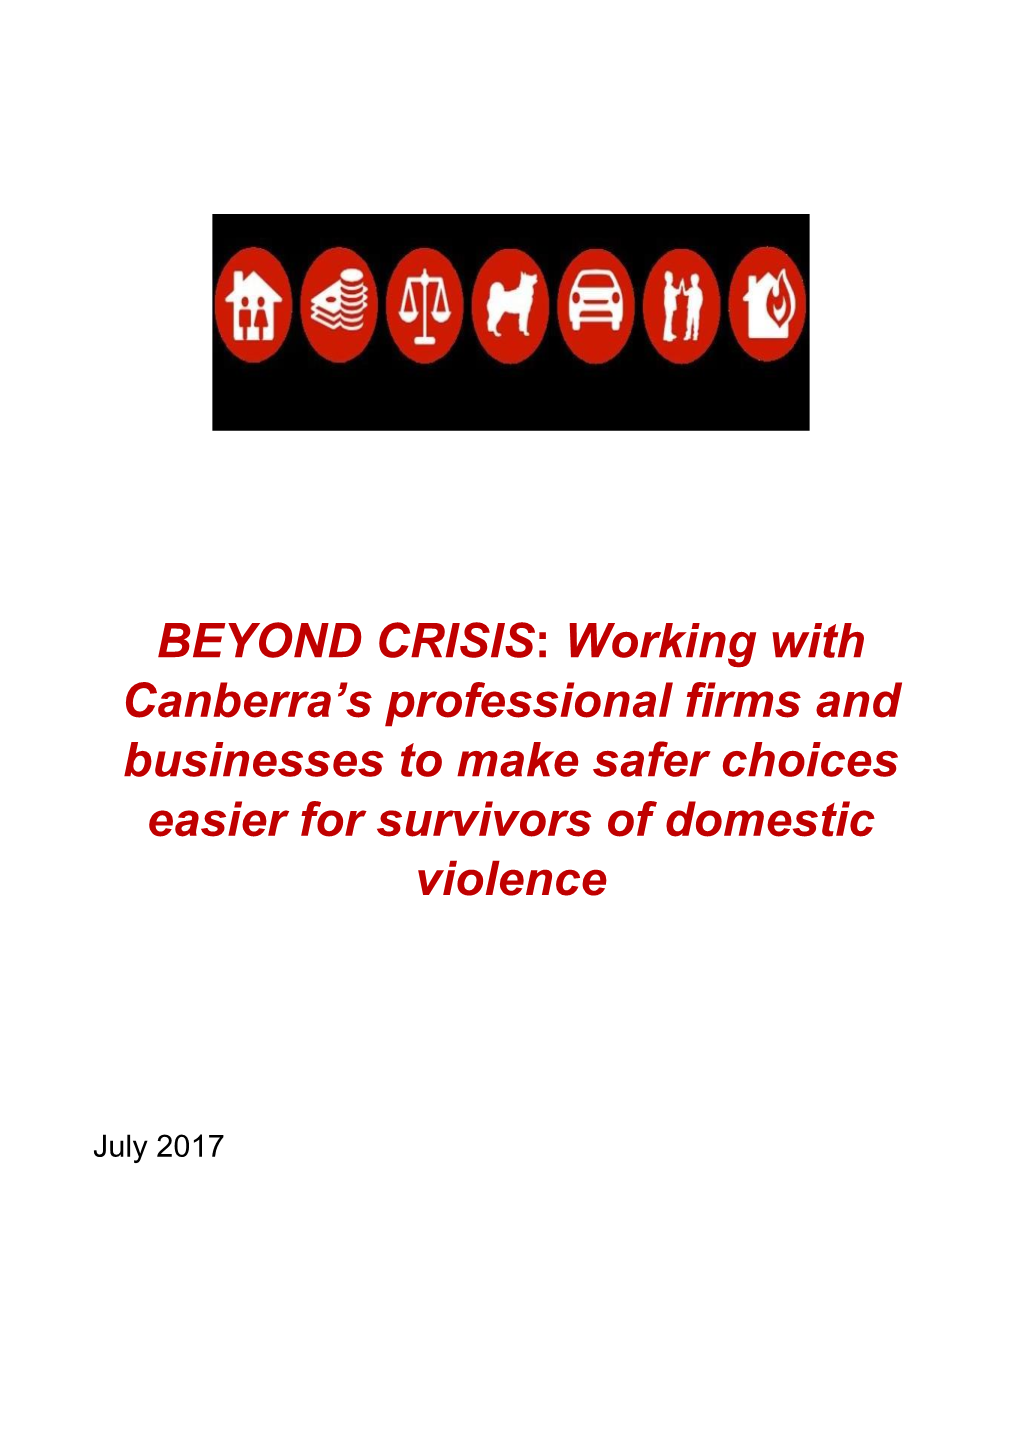 BEYOND CRISIS: Working with Canberra’S Professional Firms and Businesses to Make Safer Choices Easier for Survivors of Domestic Violence